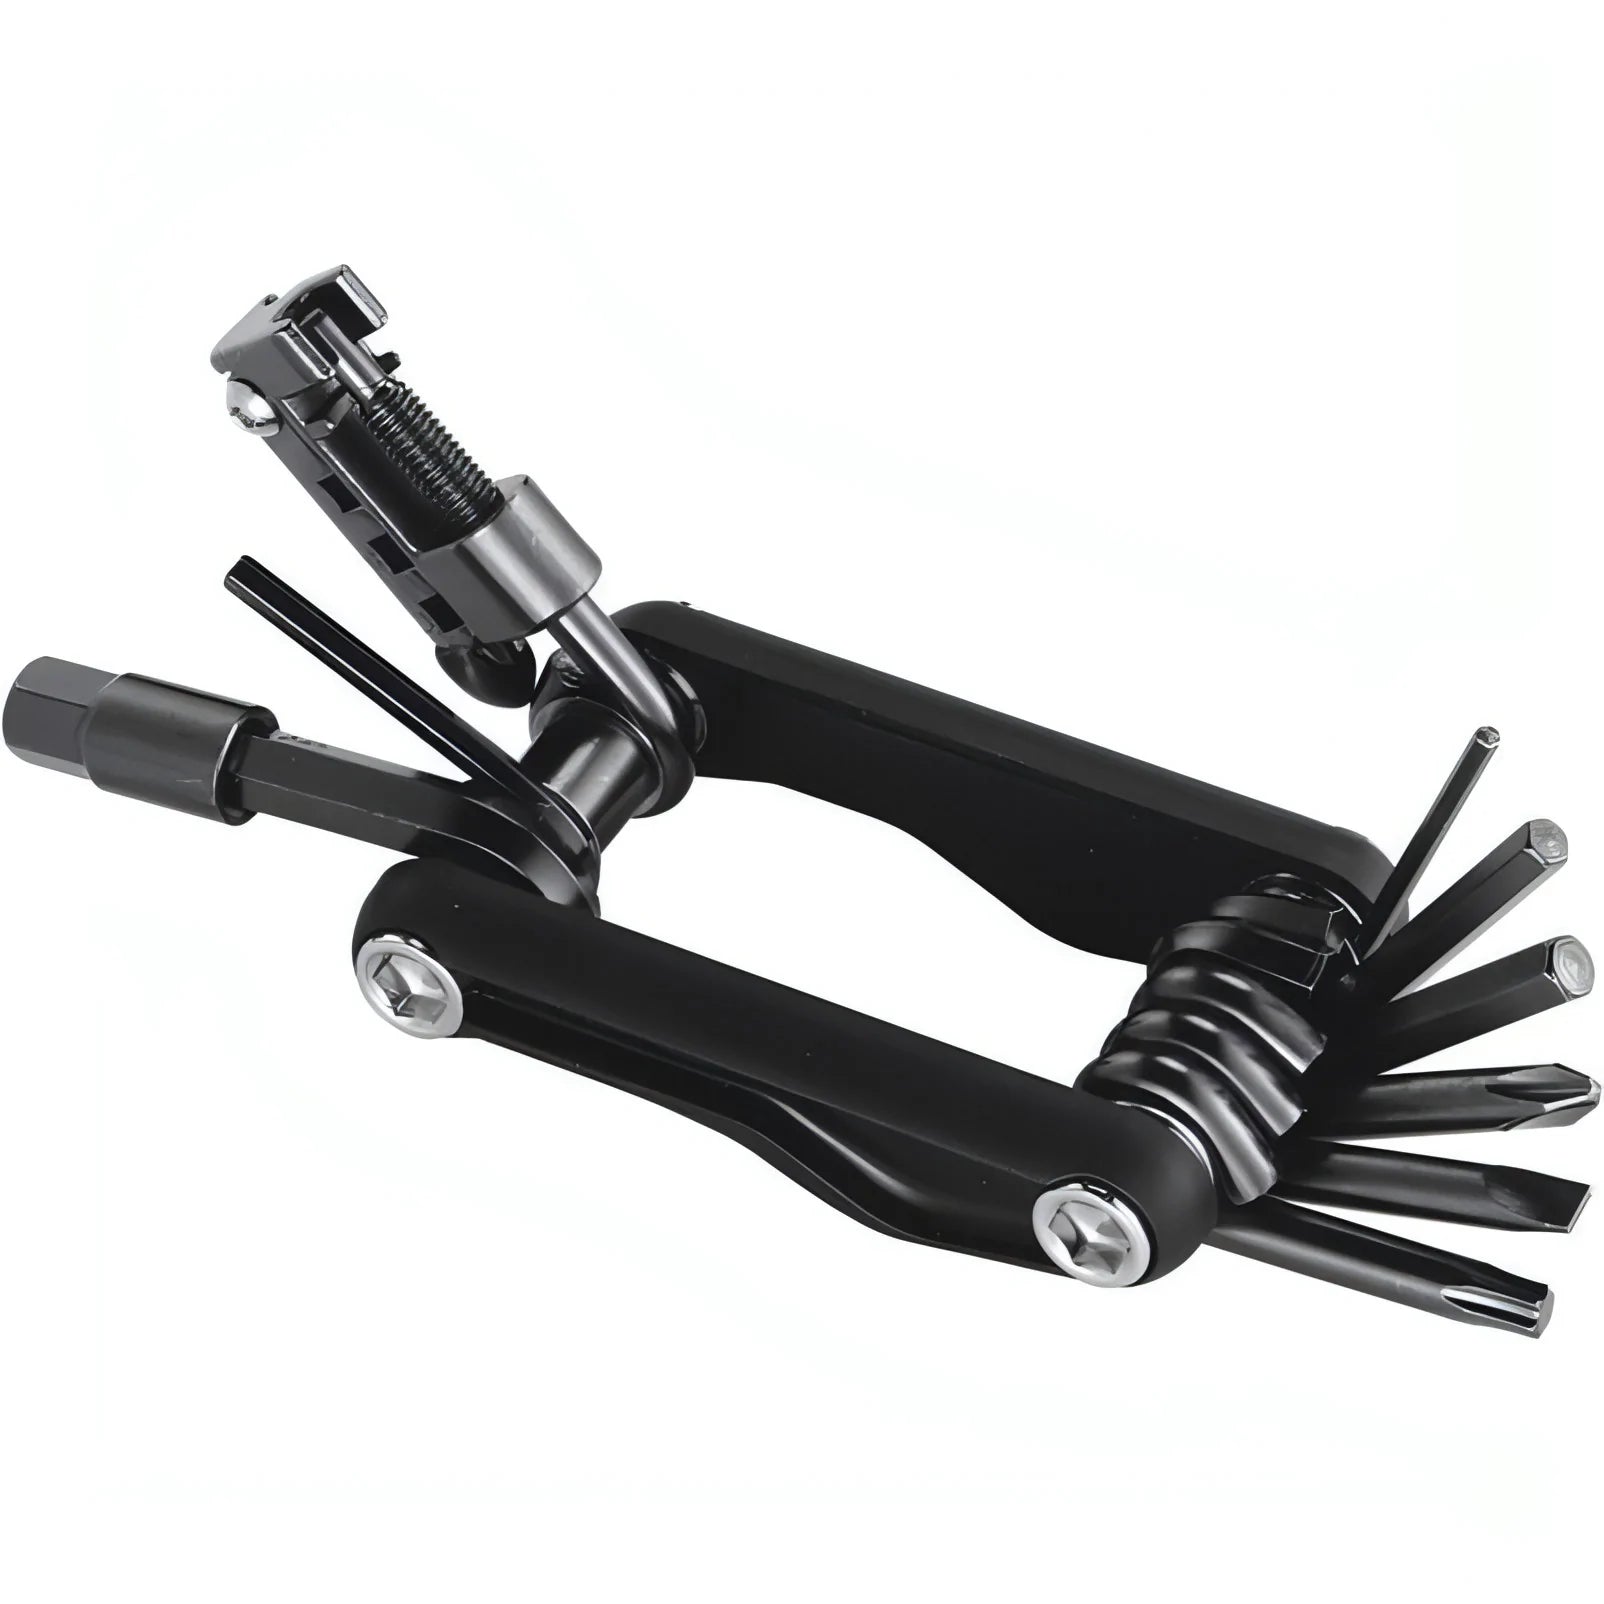 Syncros Composite 14CT Bicycle Multi Tool - Black - charged-ebikes